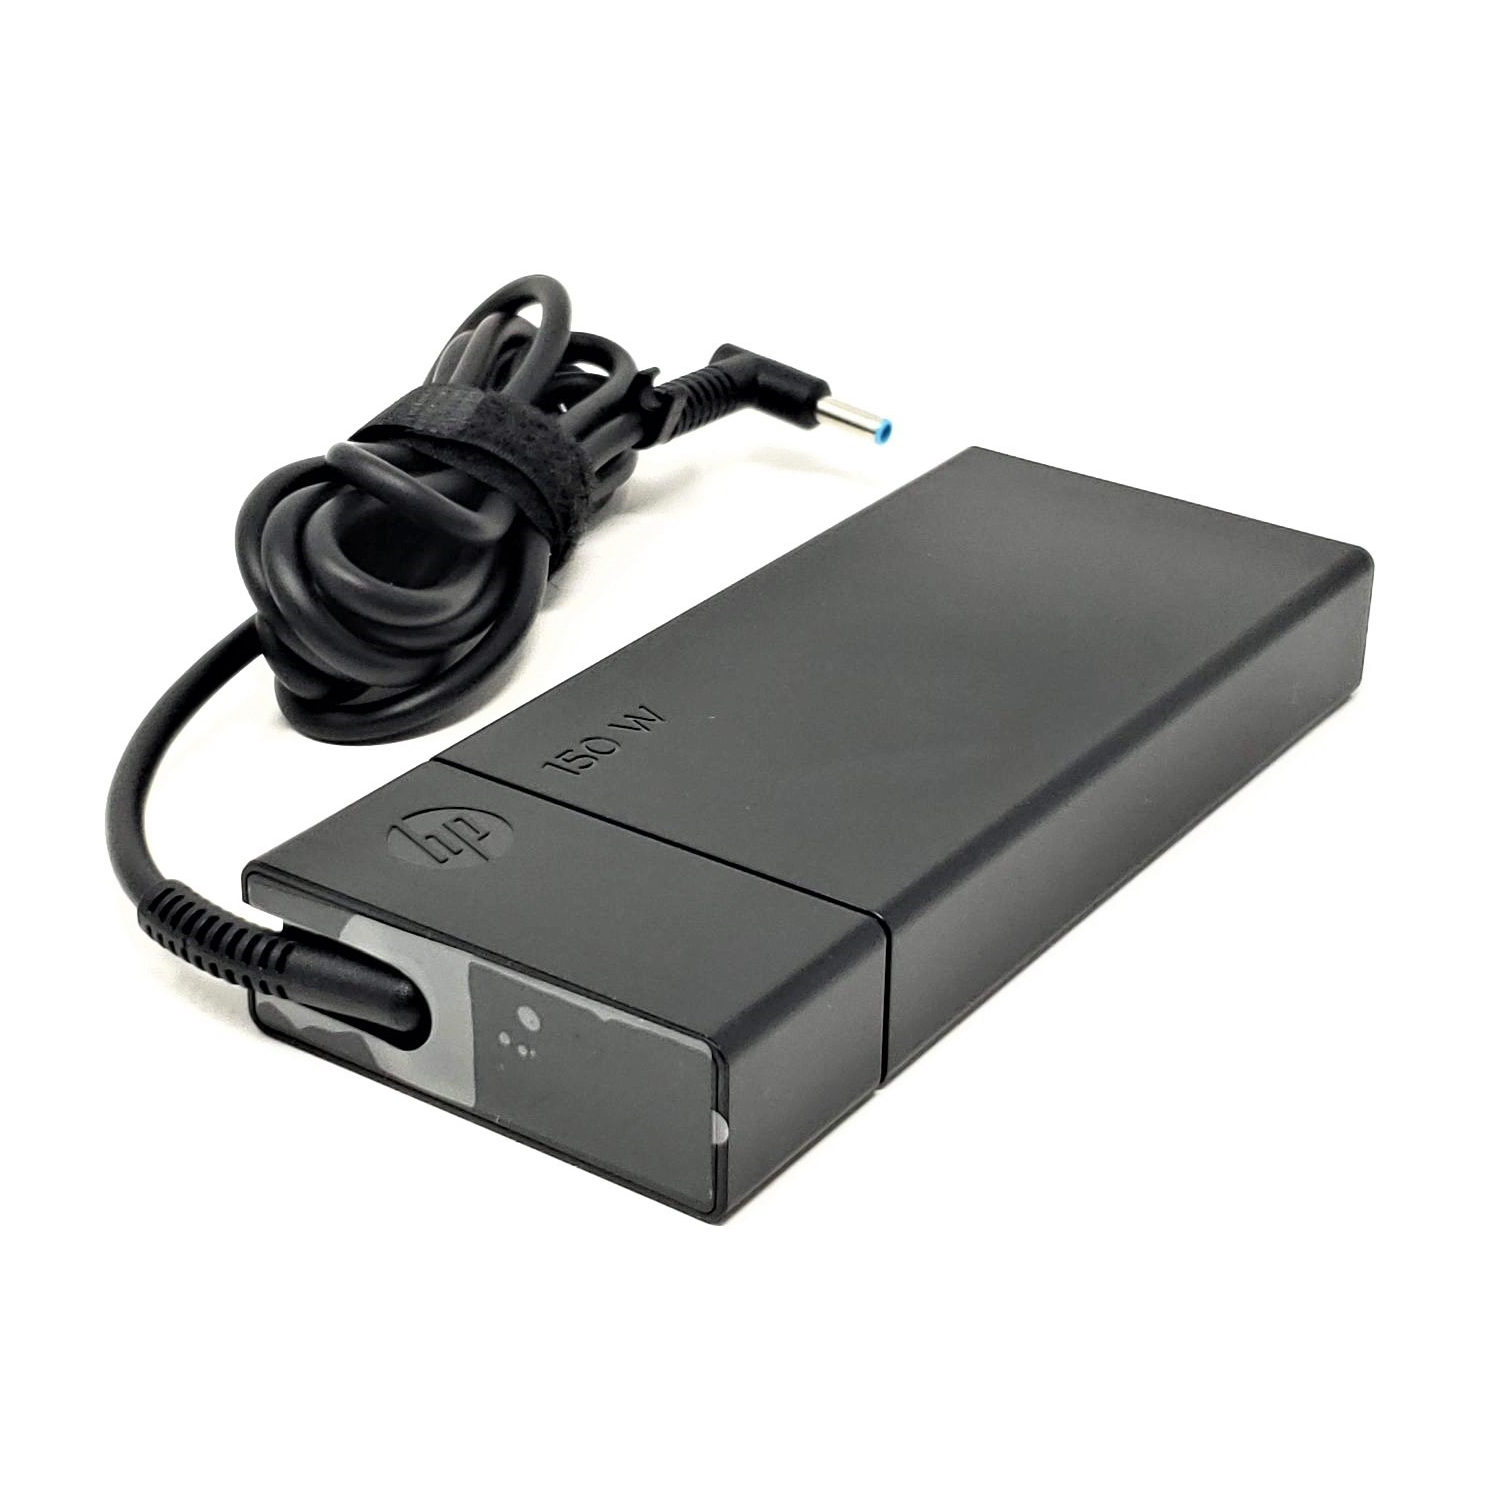 Refurbished (Good) Genuine HP AC Adapter Charger 19.5V 7.7A 150W 4.5*3.0mm Blue Tip